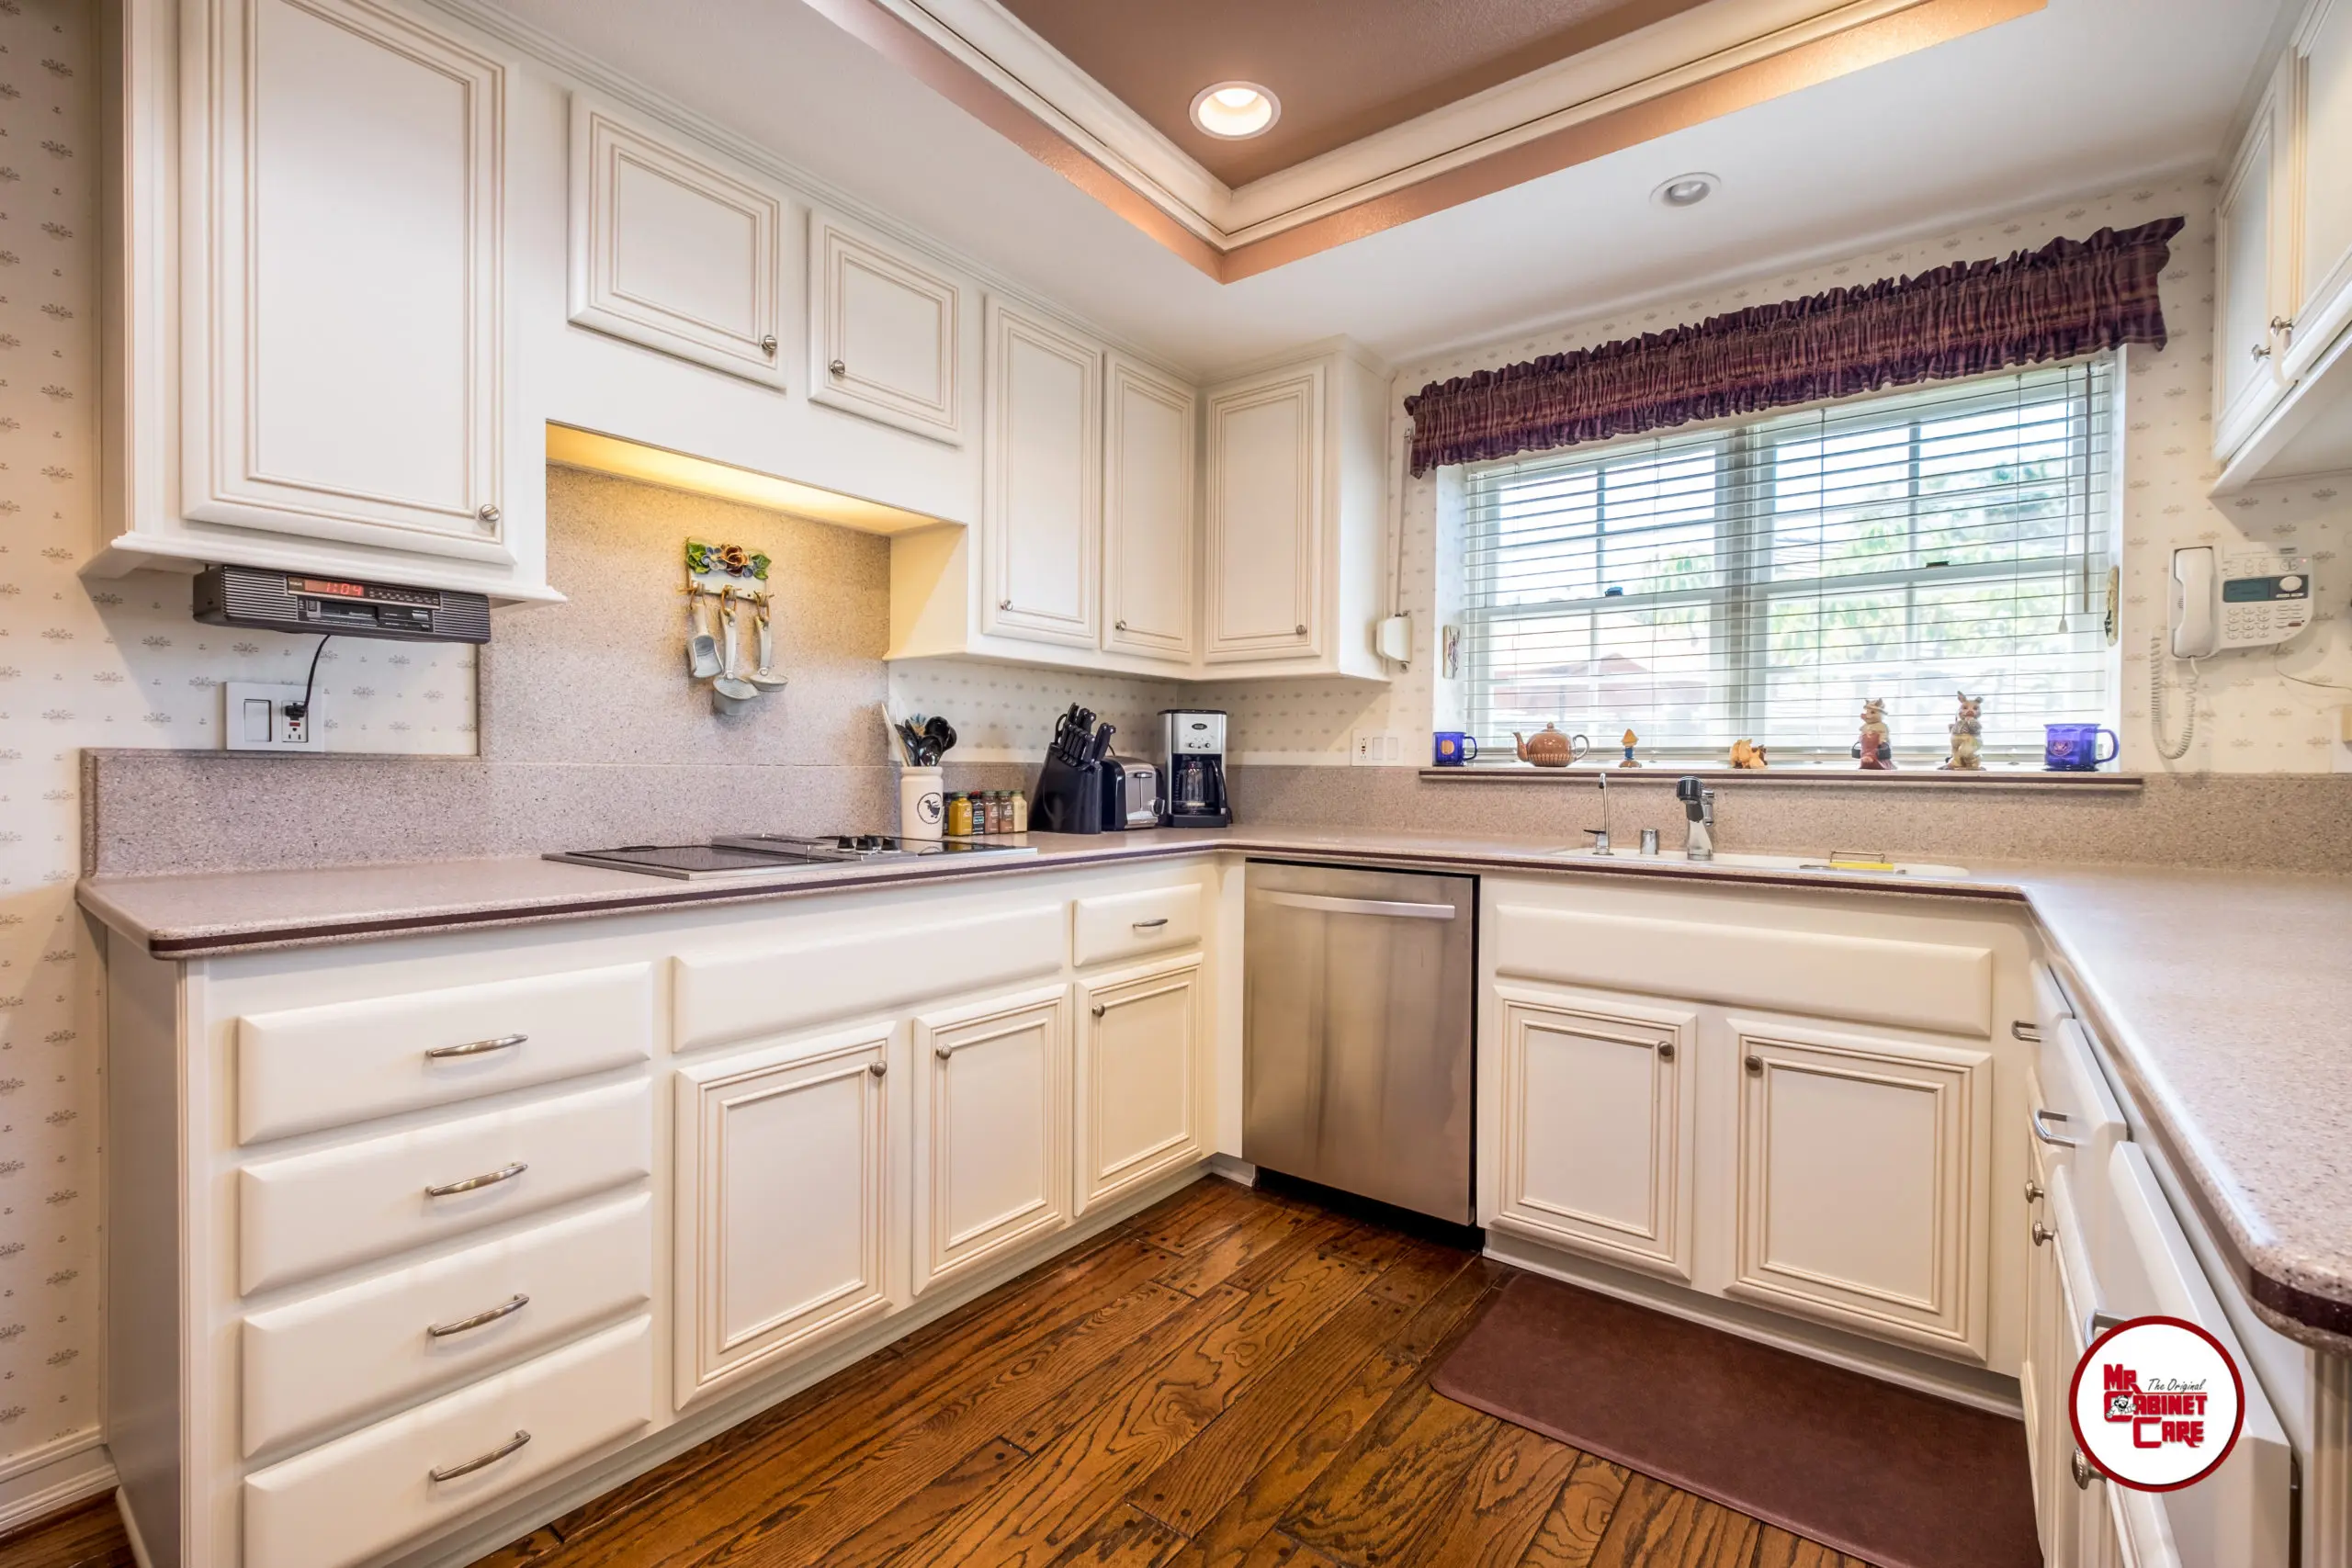 Breaking Down The Costs Of Cabinet Refacing, How Much Does It Cost To Have Your Cabinets Refaced